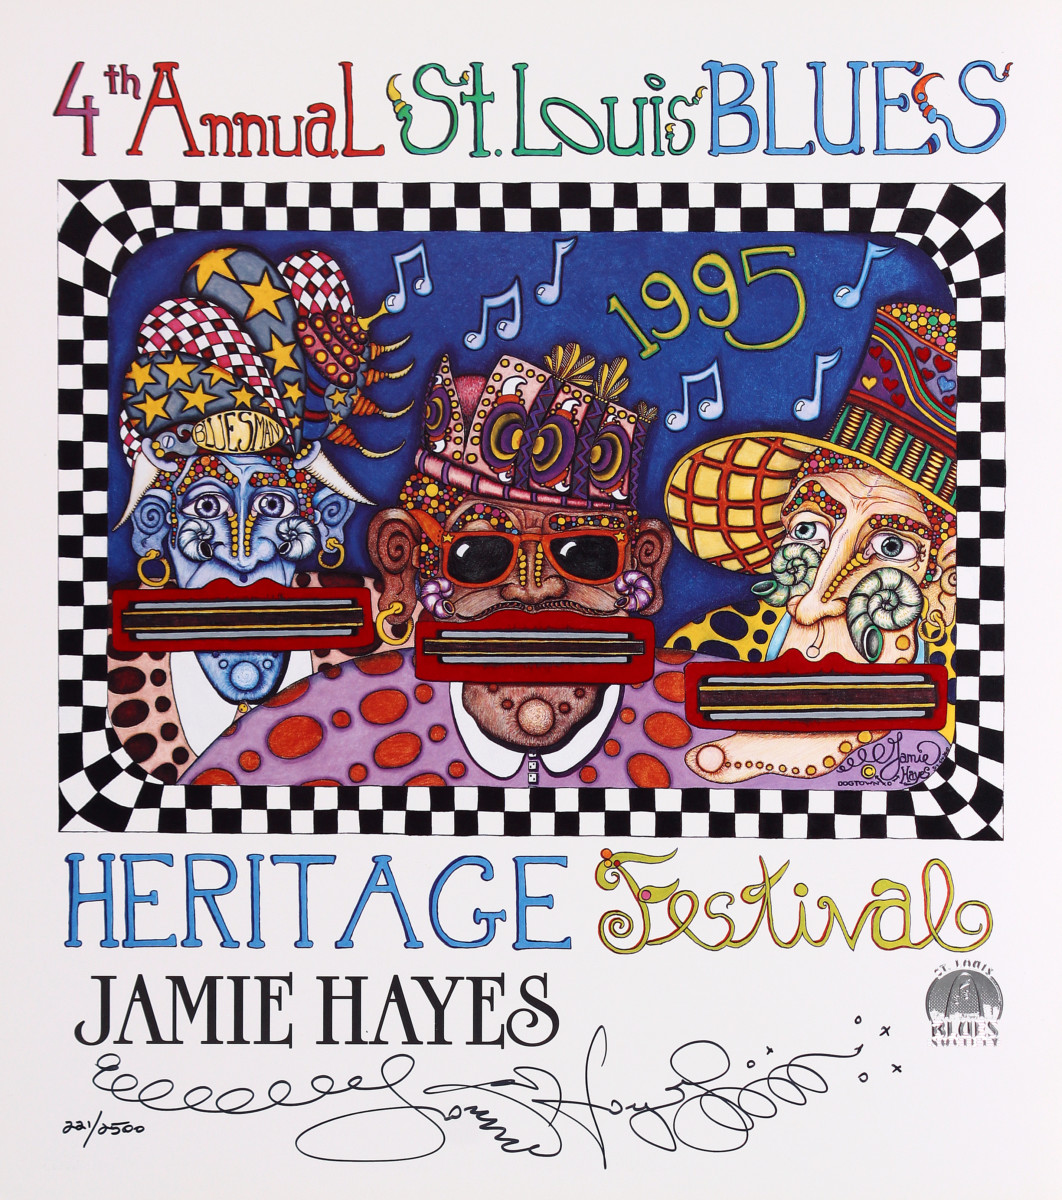 St. Louis Blues Festival 1995 Poster The Jamie Hayes Gallery